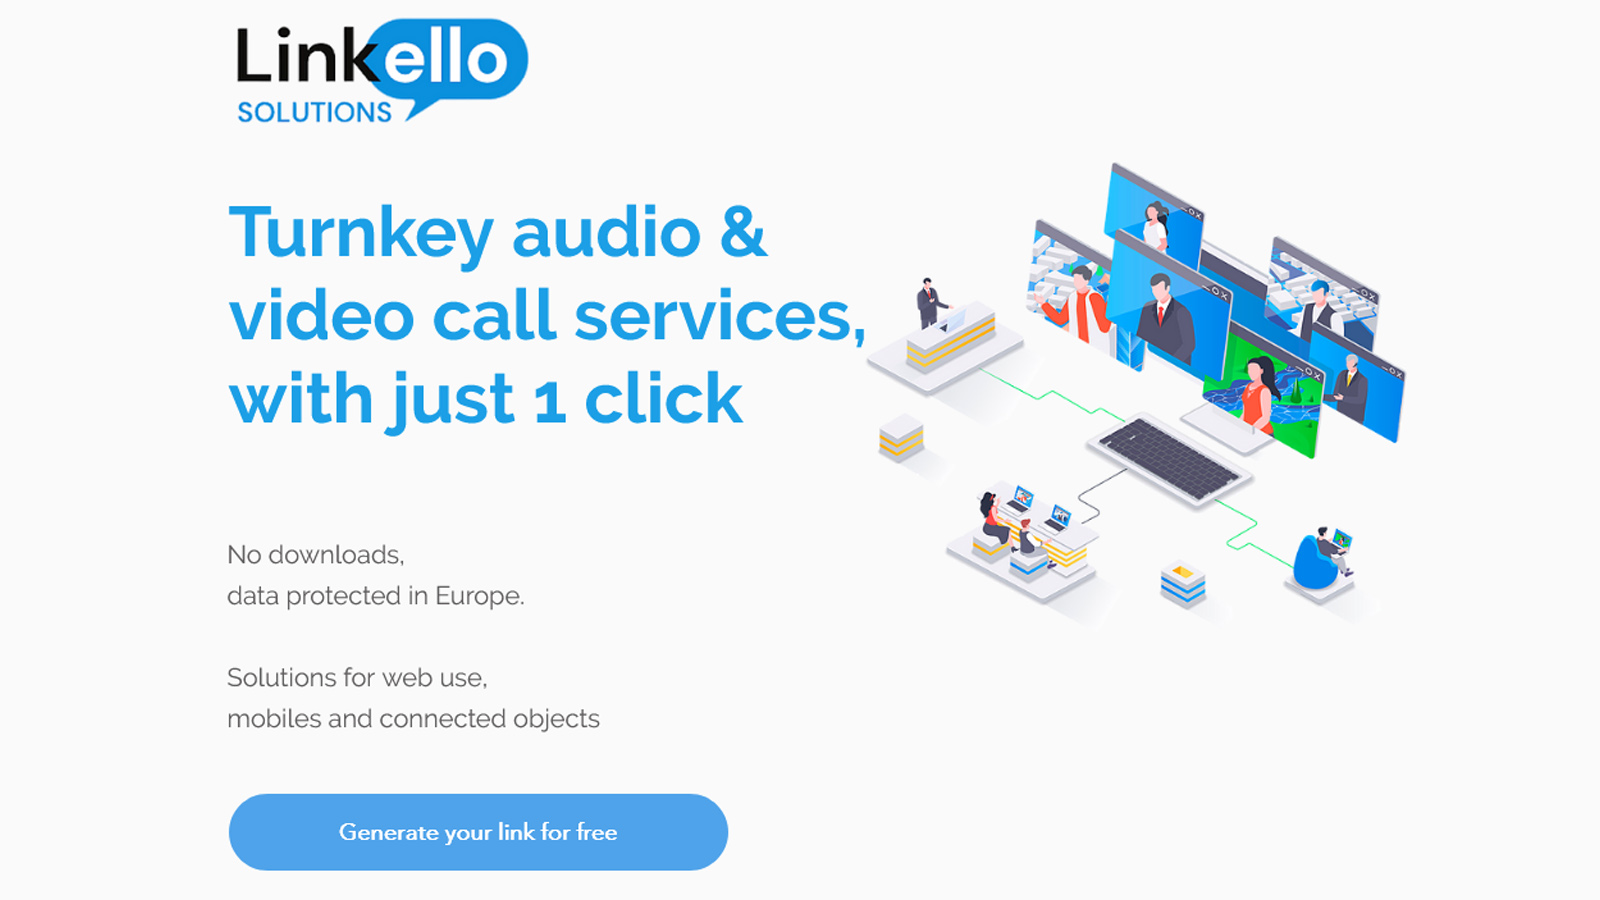 Find detailed information about Linkello